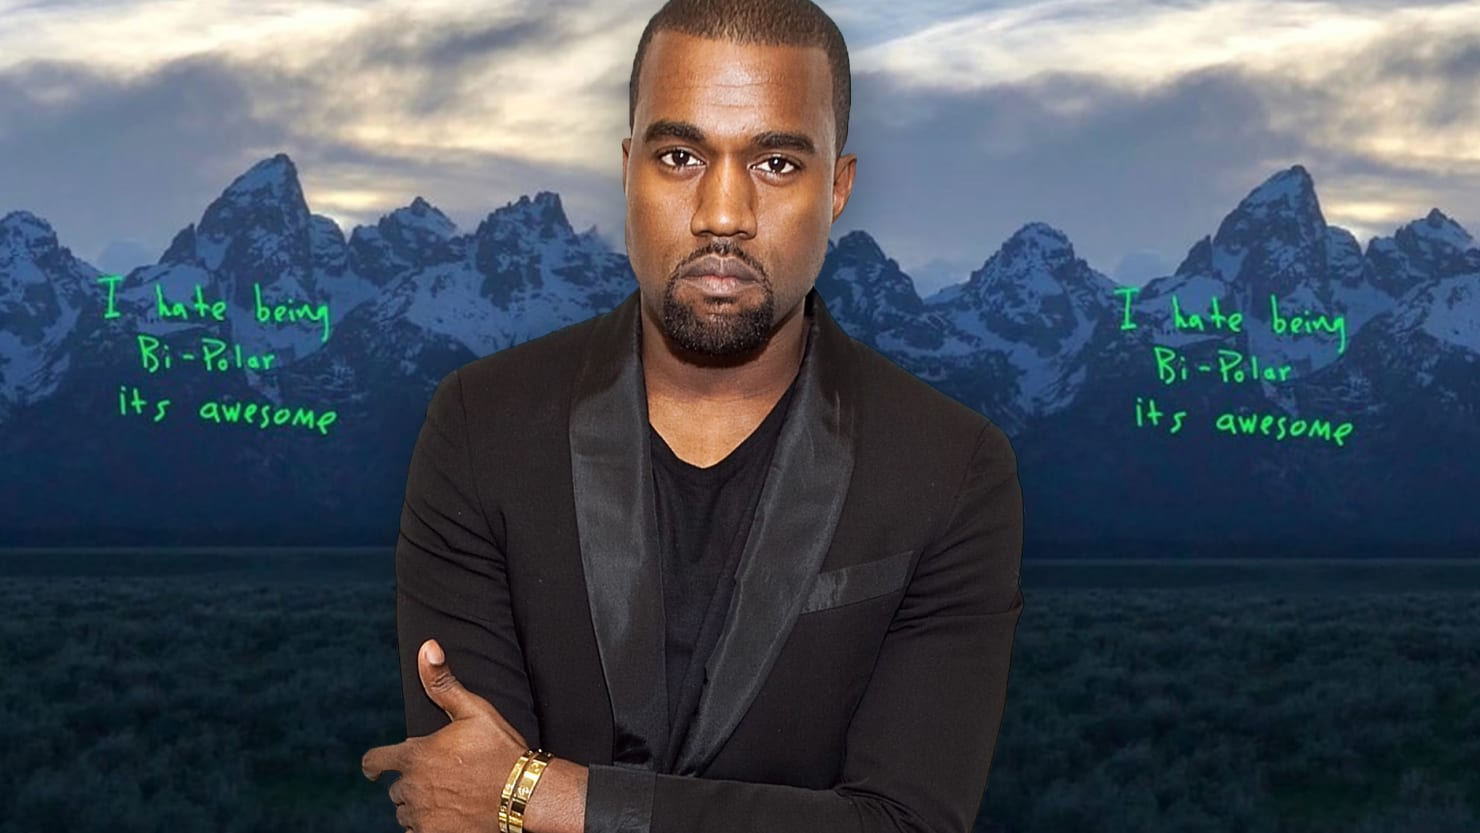 Kanye West’s New Album ‘Ye’ Is a Colossal Letdown